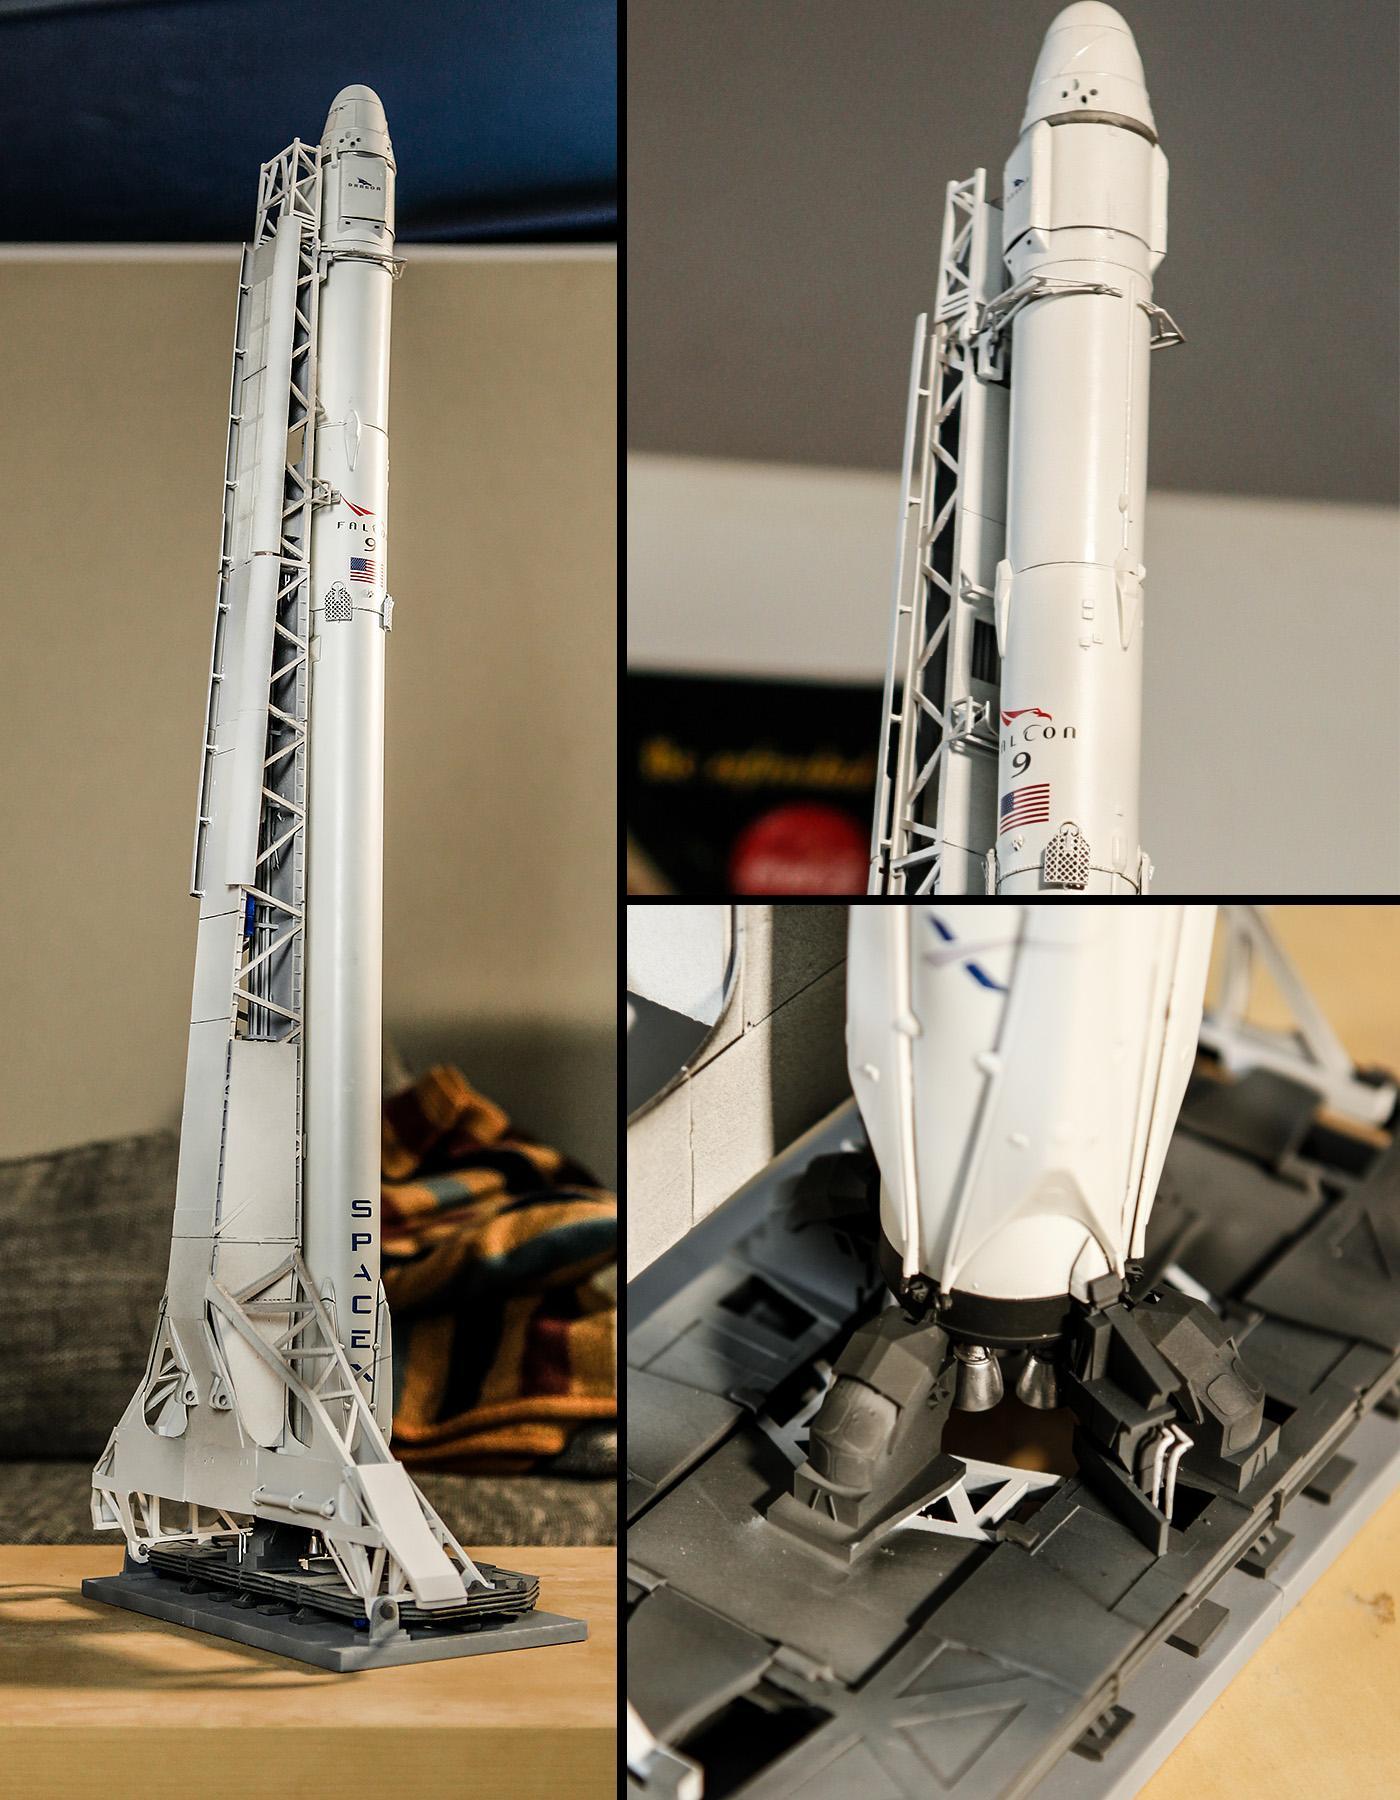 Dragon Falcon 9 Logo - Falcon 9/Dragon on TEL at 39A 1/72 model finished :) : SpaceXLounge